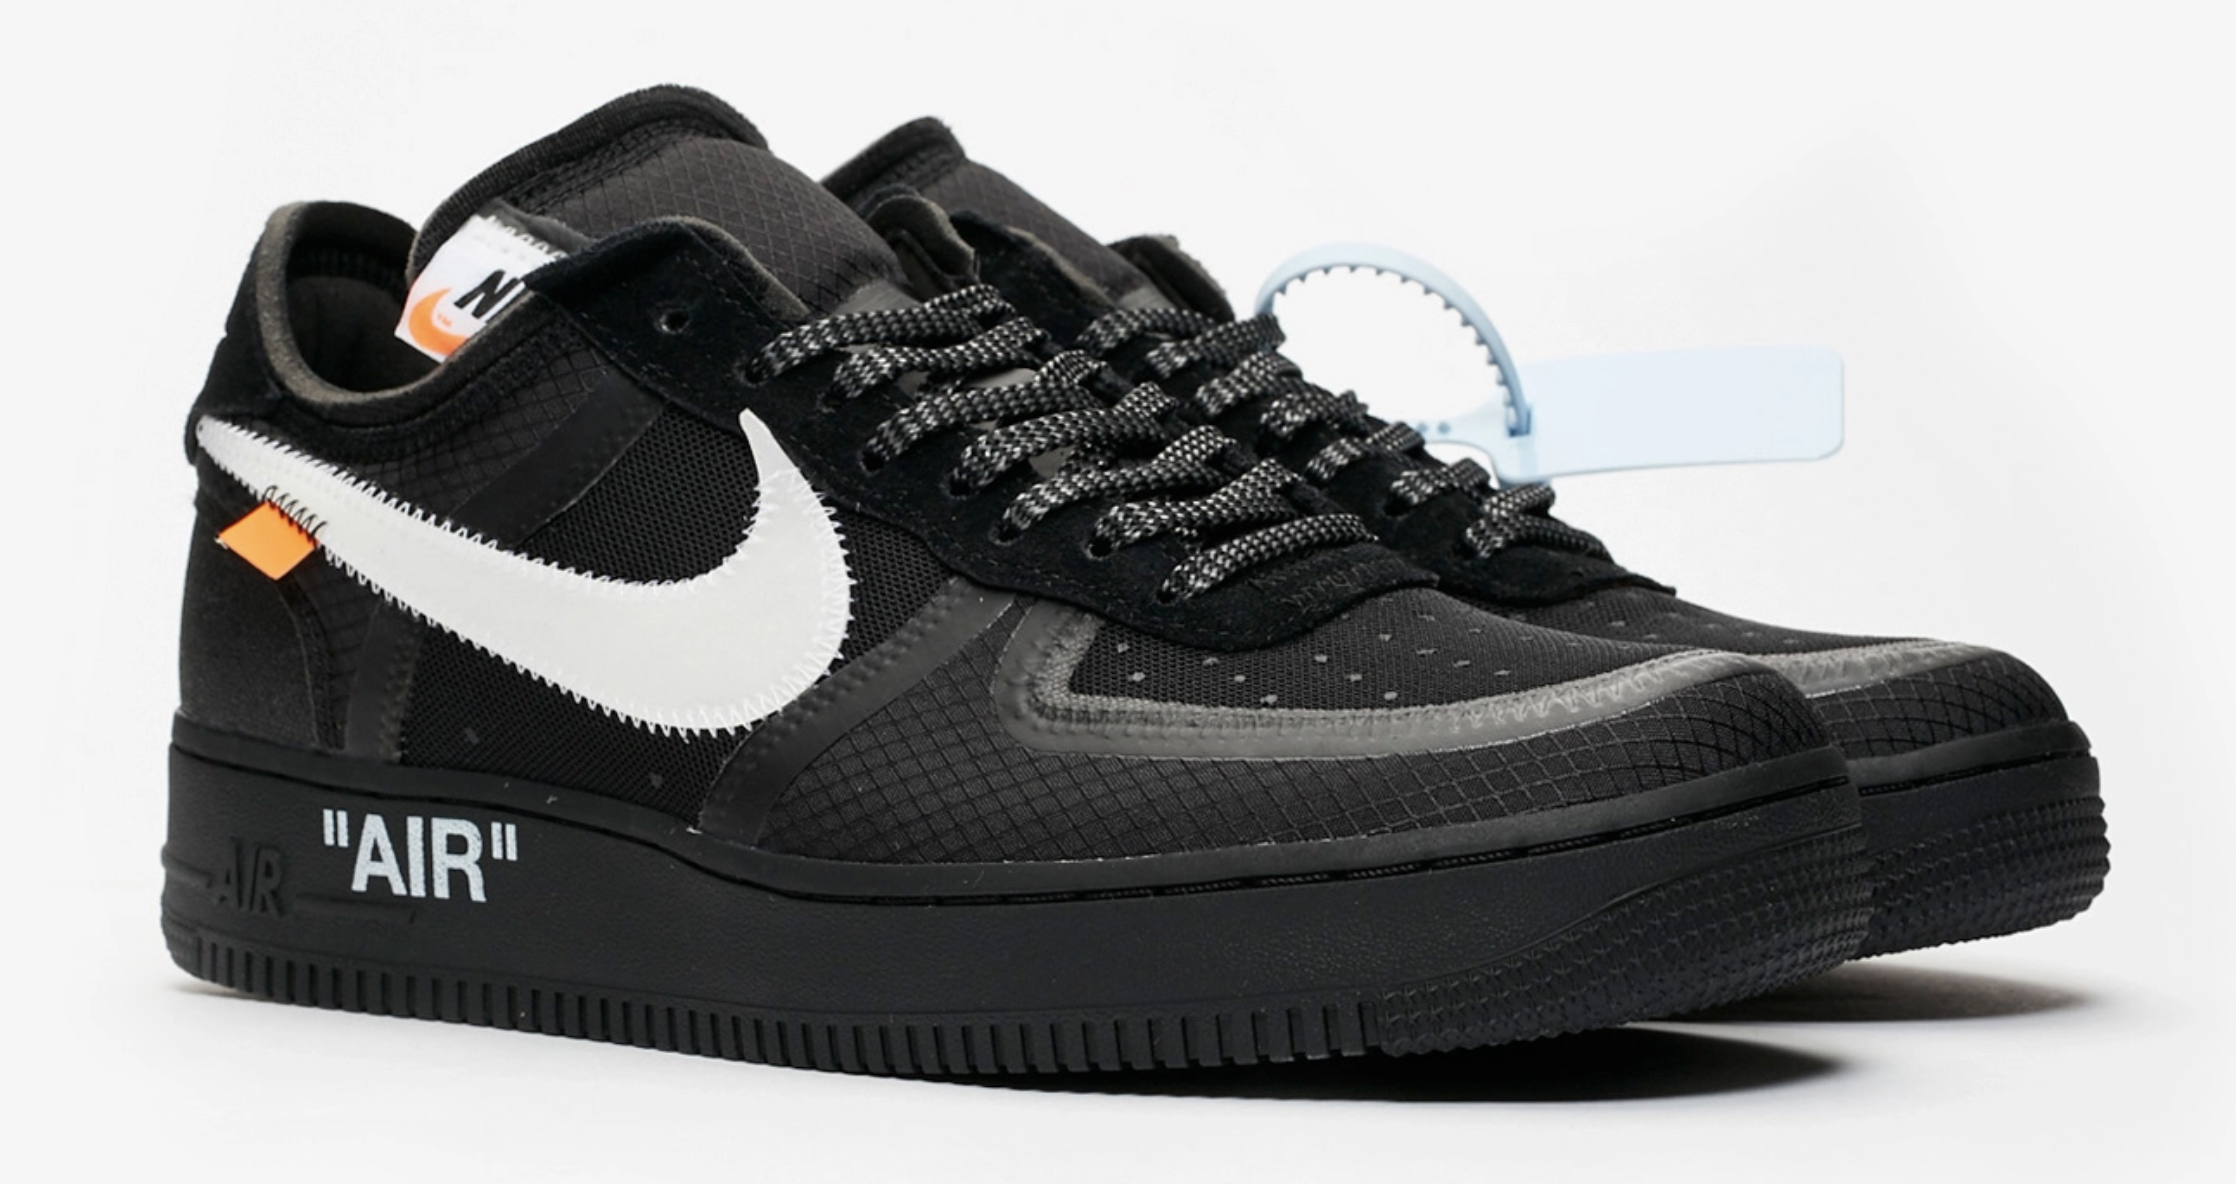 Brand New Off-White x Nike AF1 Black Size 9 for $1,300 Available